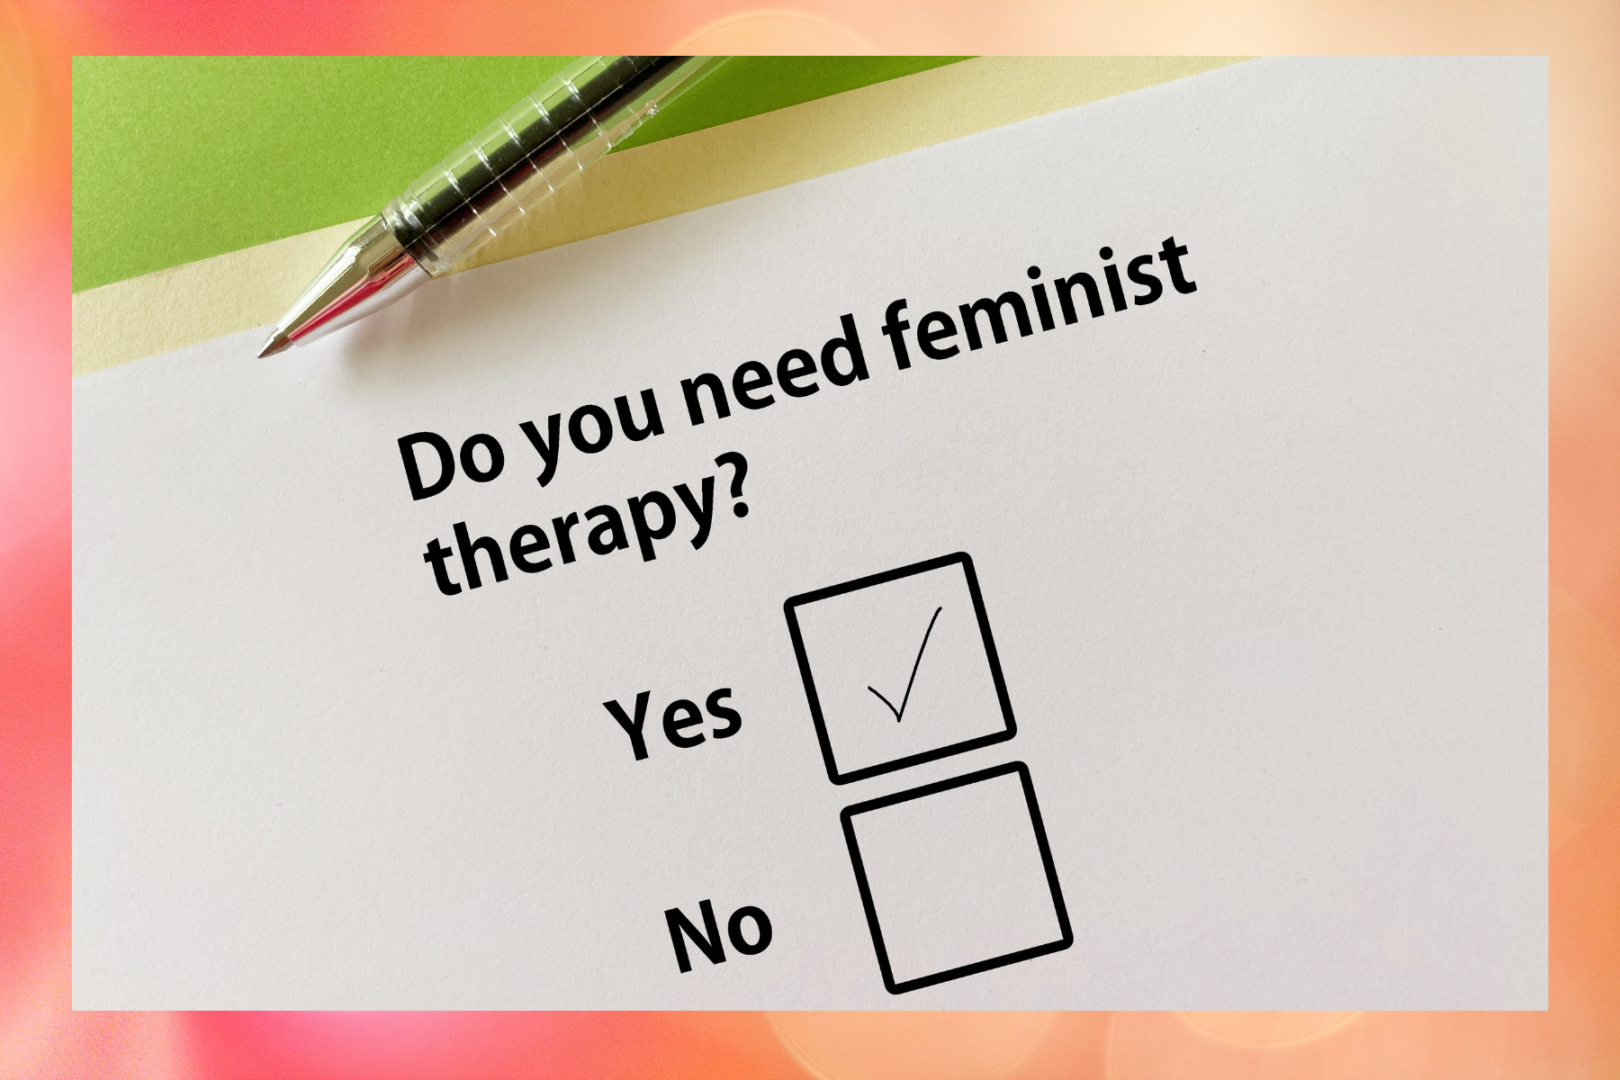 A person is answering question about counseling and therapy. She needs feminist therapy.